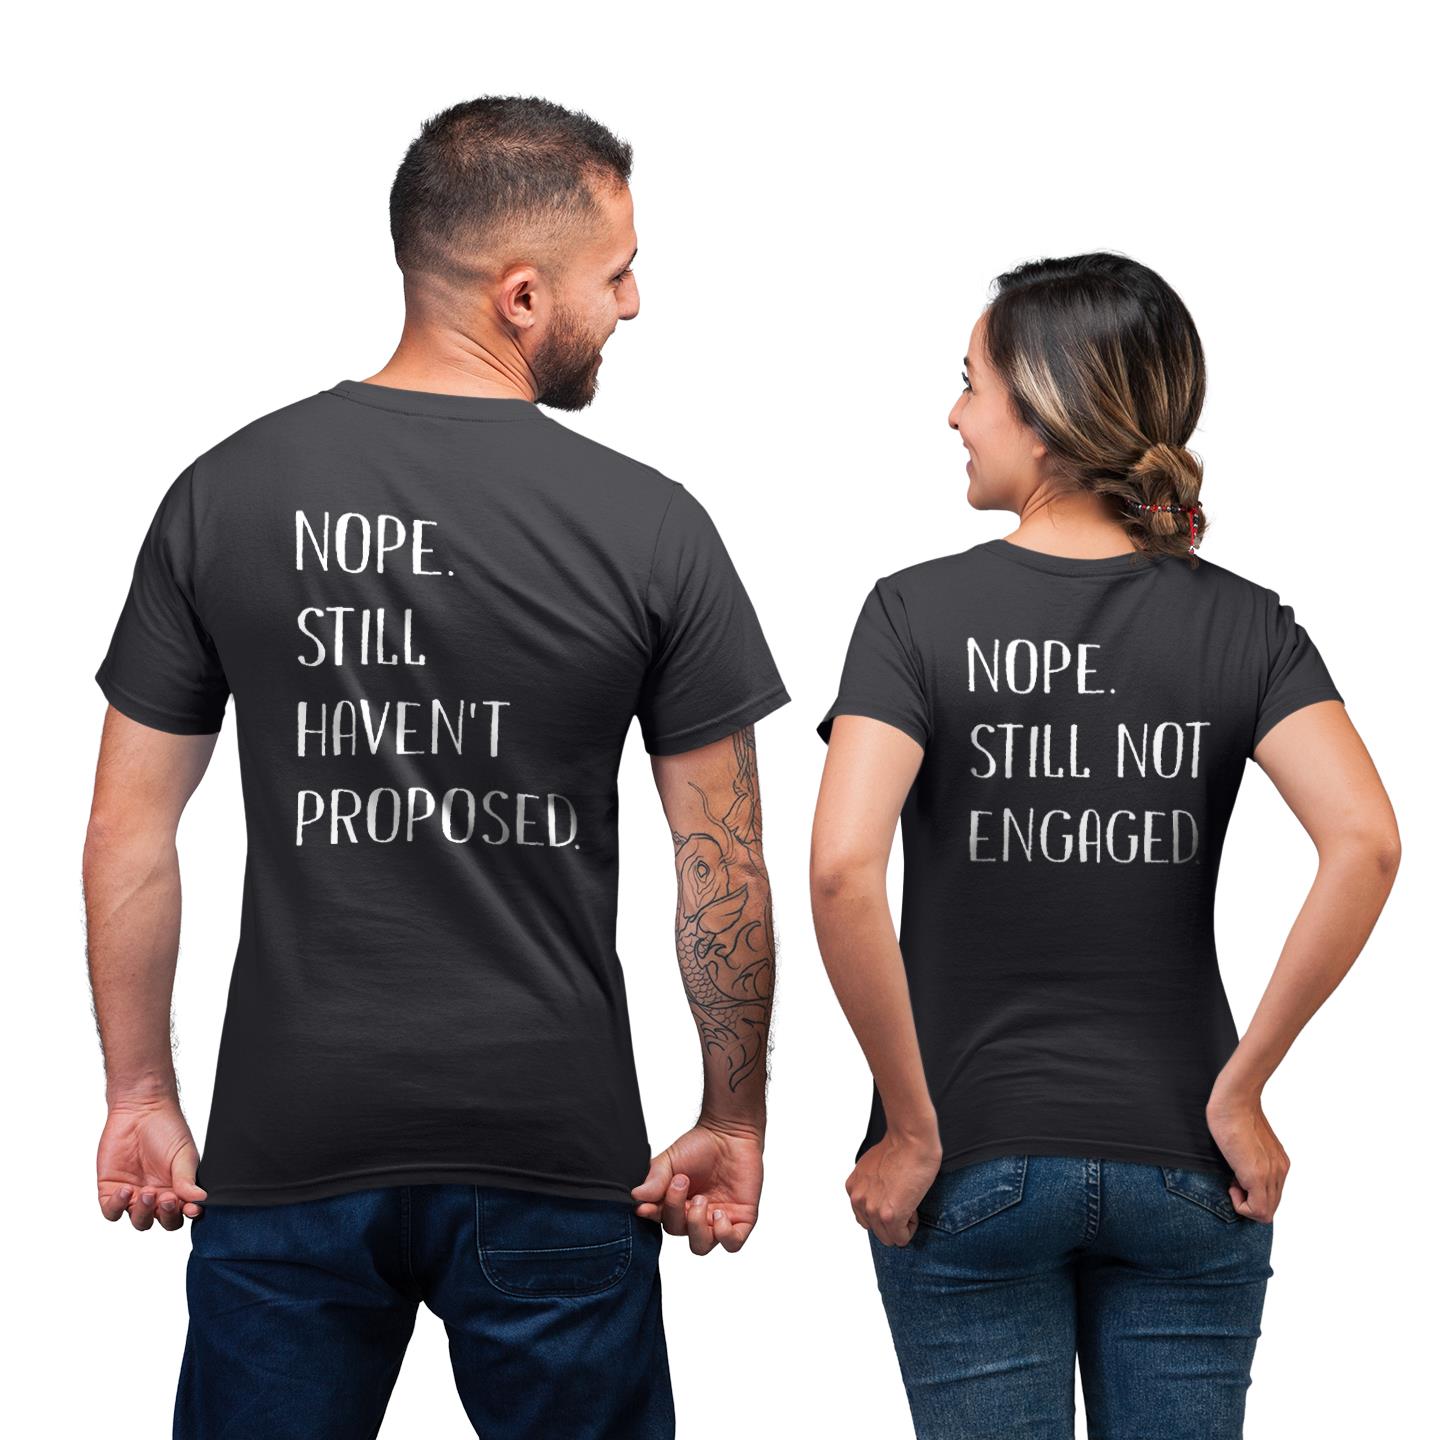 Matching For Lover Couple Nope Still Not Engaged Nope Still Haven?t Proposed Gift T-shirt